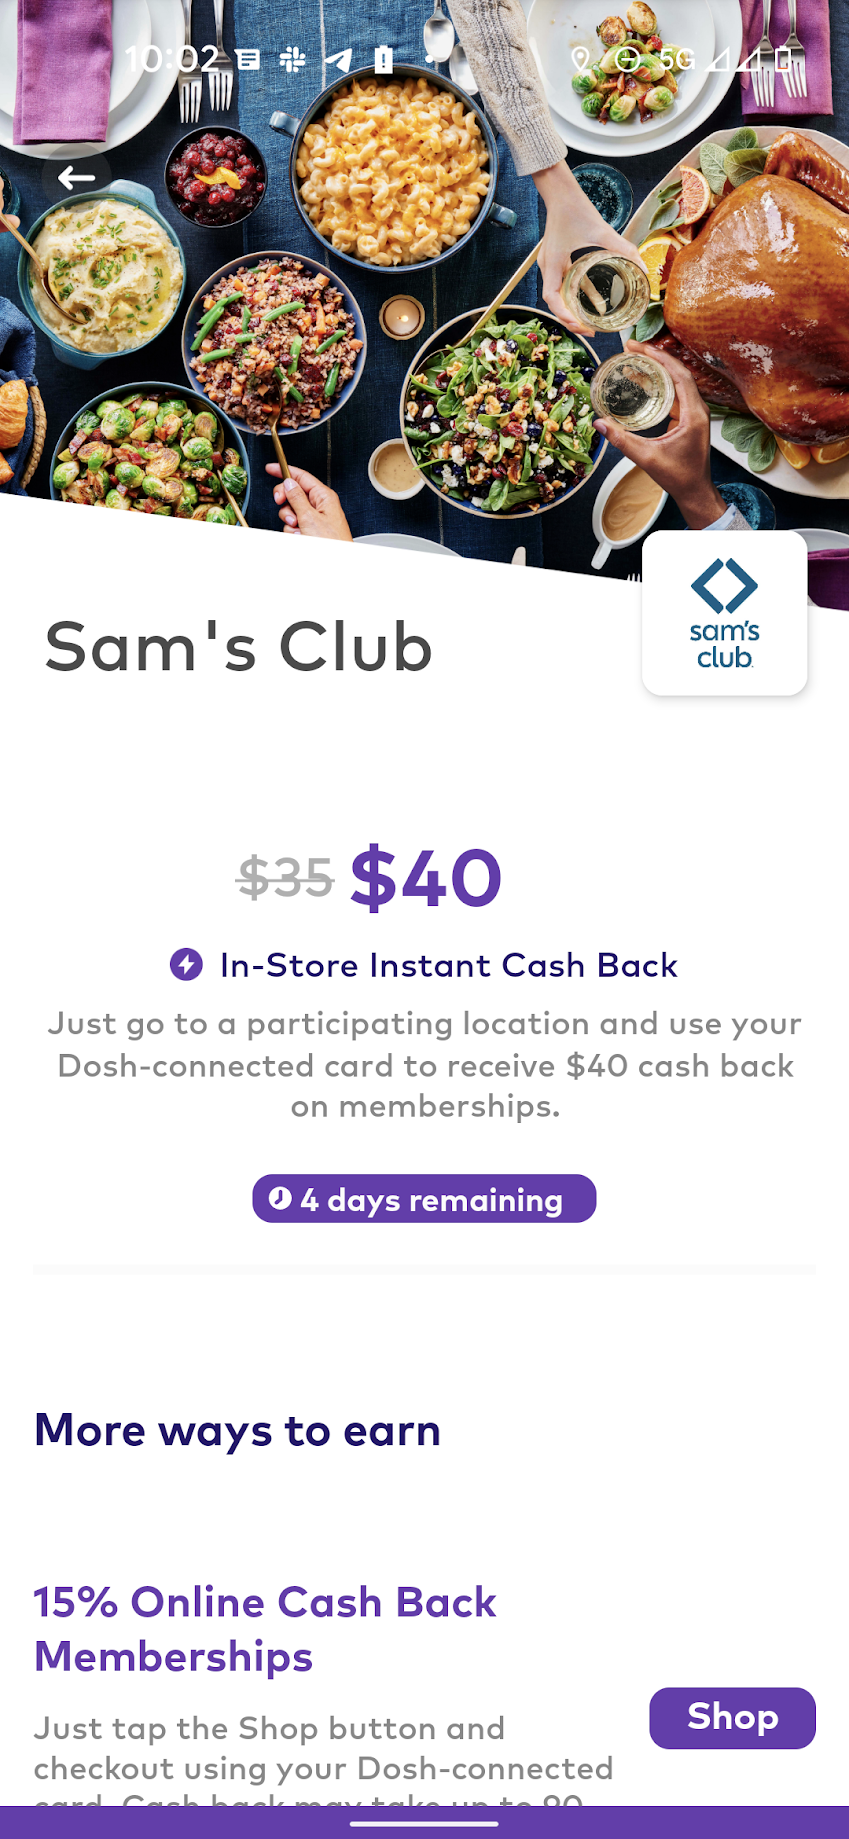 EXPIRED) $40 back on Sam's Club membership via Dosh; stack with Amex Offer